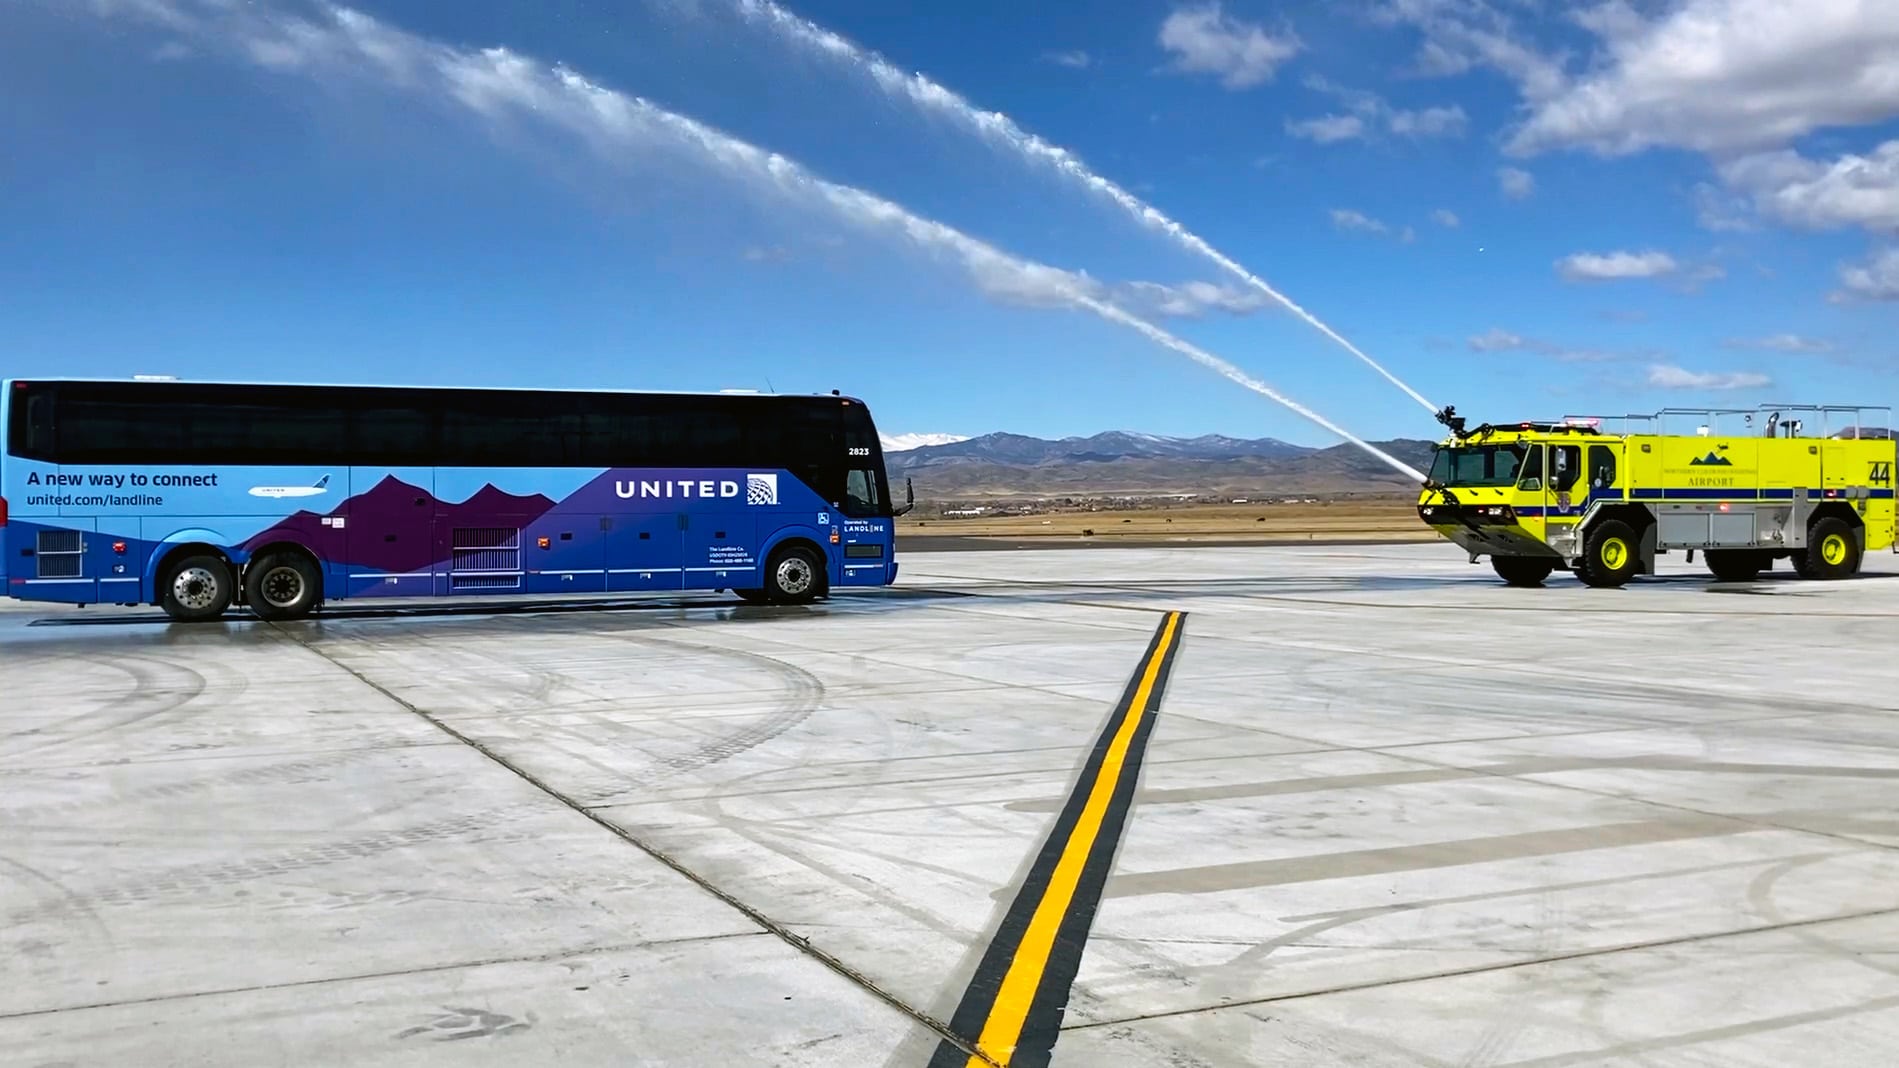 image of ARFF truck completing a water cannon salute over United's wingless flight coach. Text overlay says to book it just like any other flight